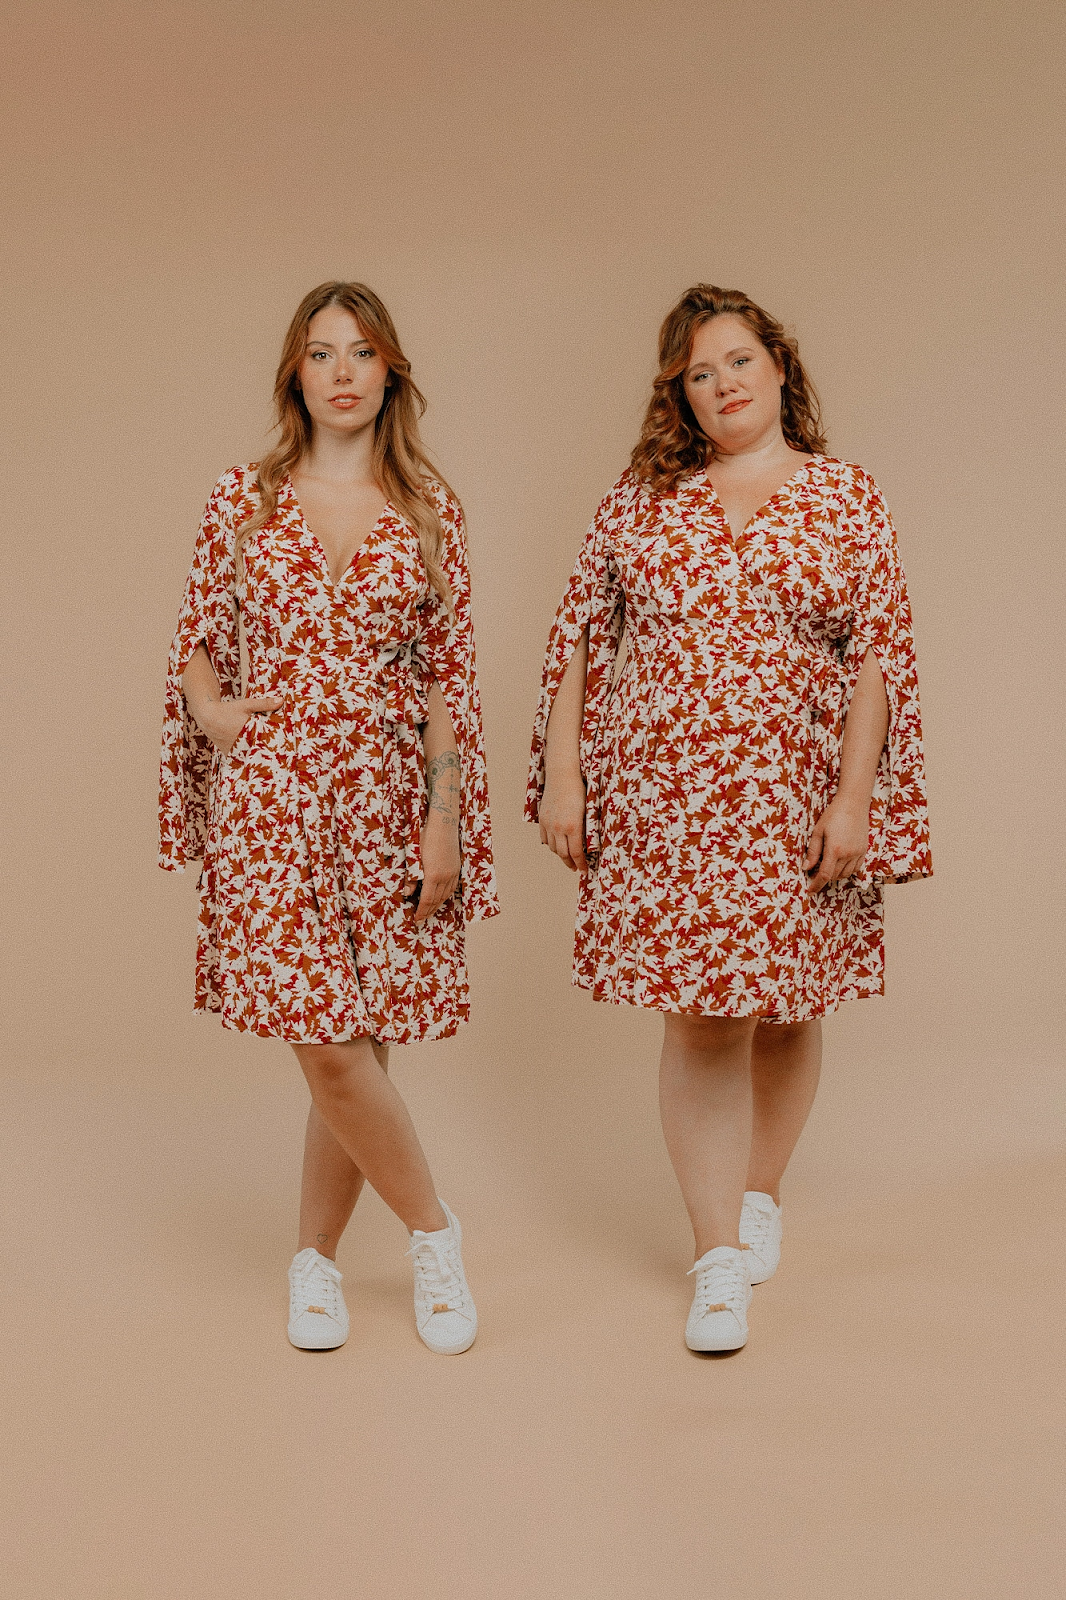 Two models wearing the same dress in the same fabric.  On the left a white person with long red hair wears a red/white patterned dress with long sleeves with front slits.  They are a medium build.  On the right, the same dress is worn by a model with a plus size build.